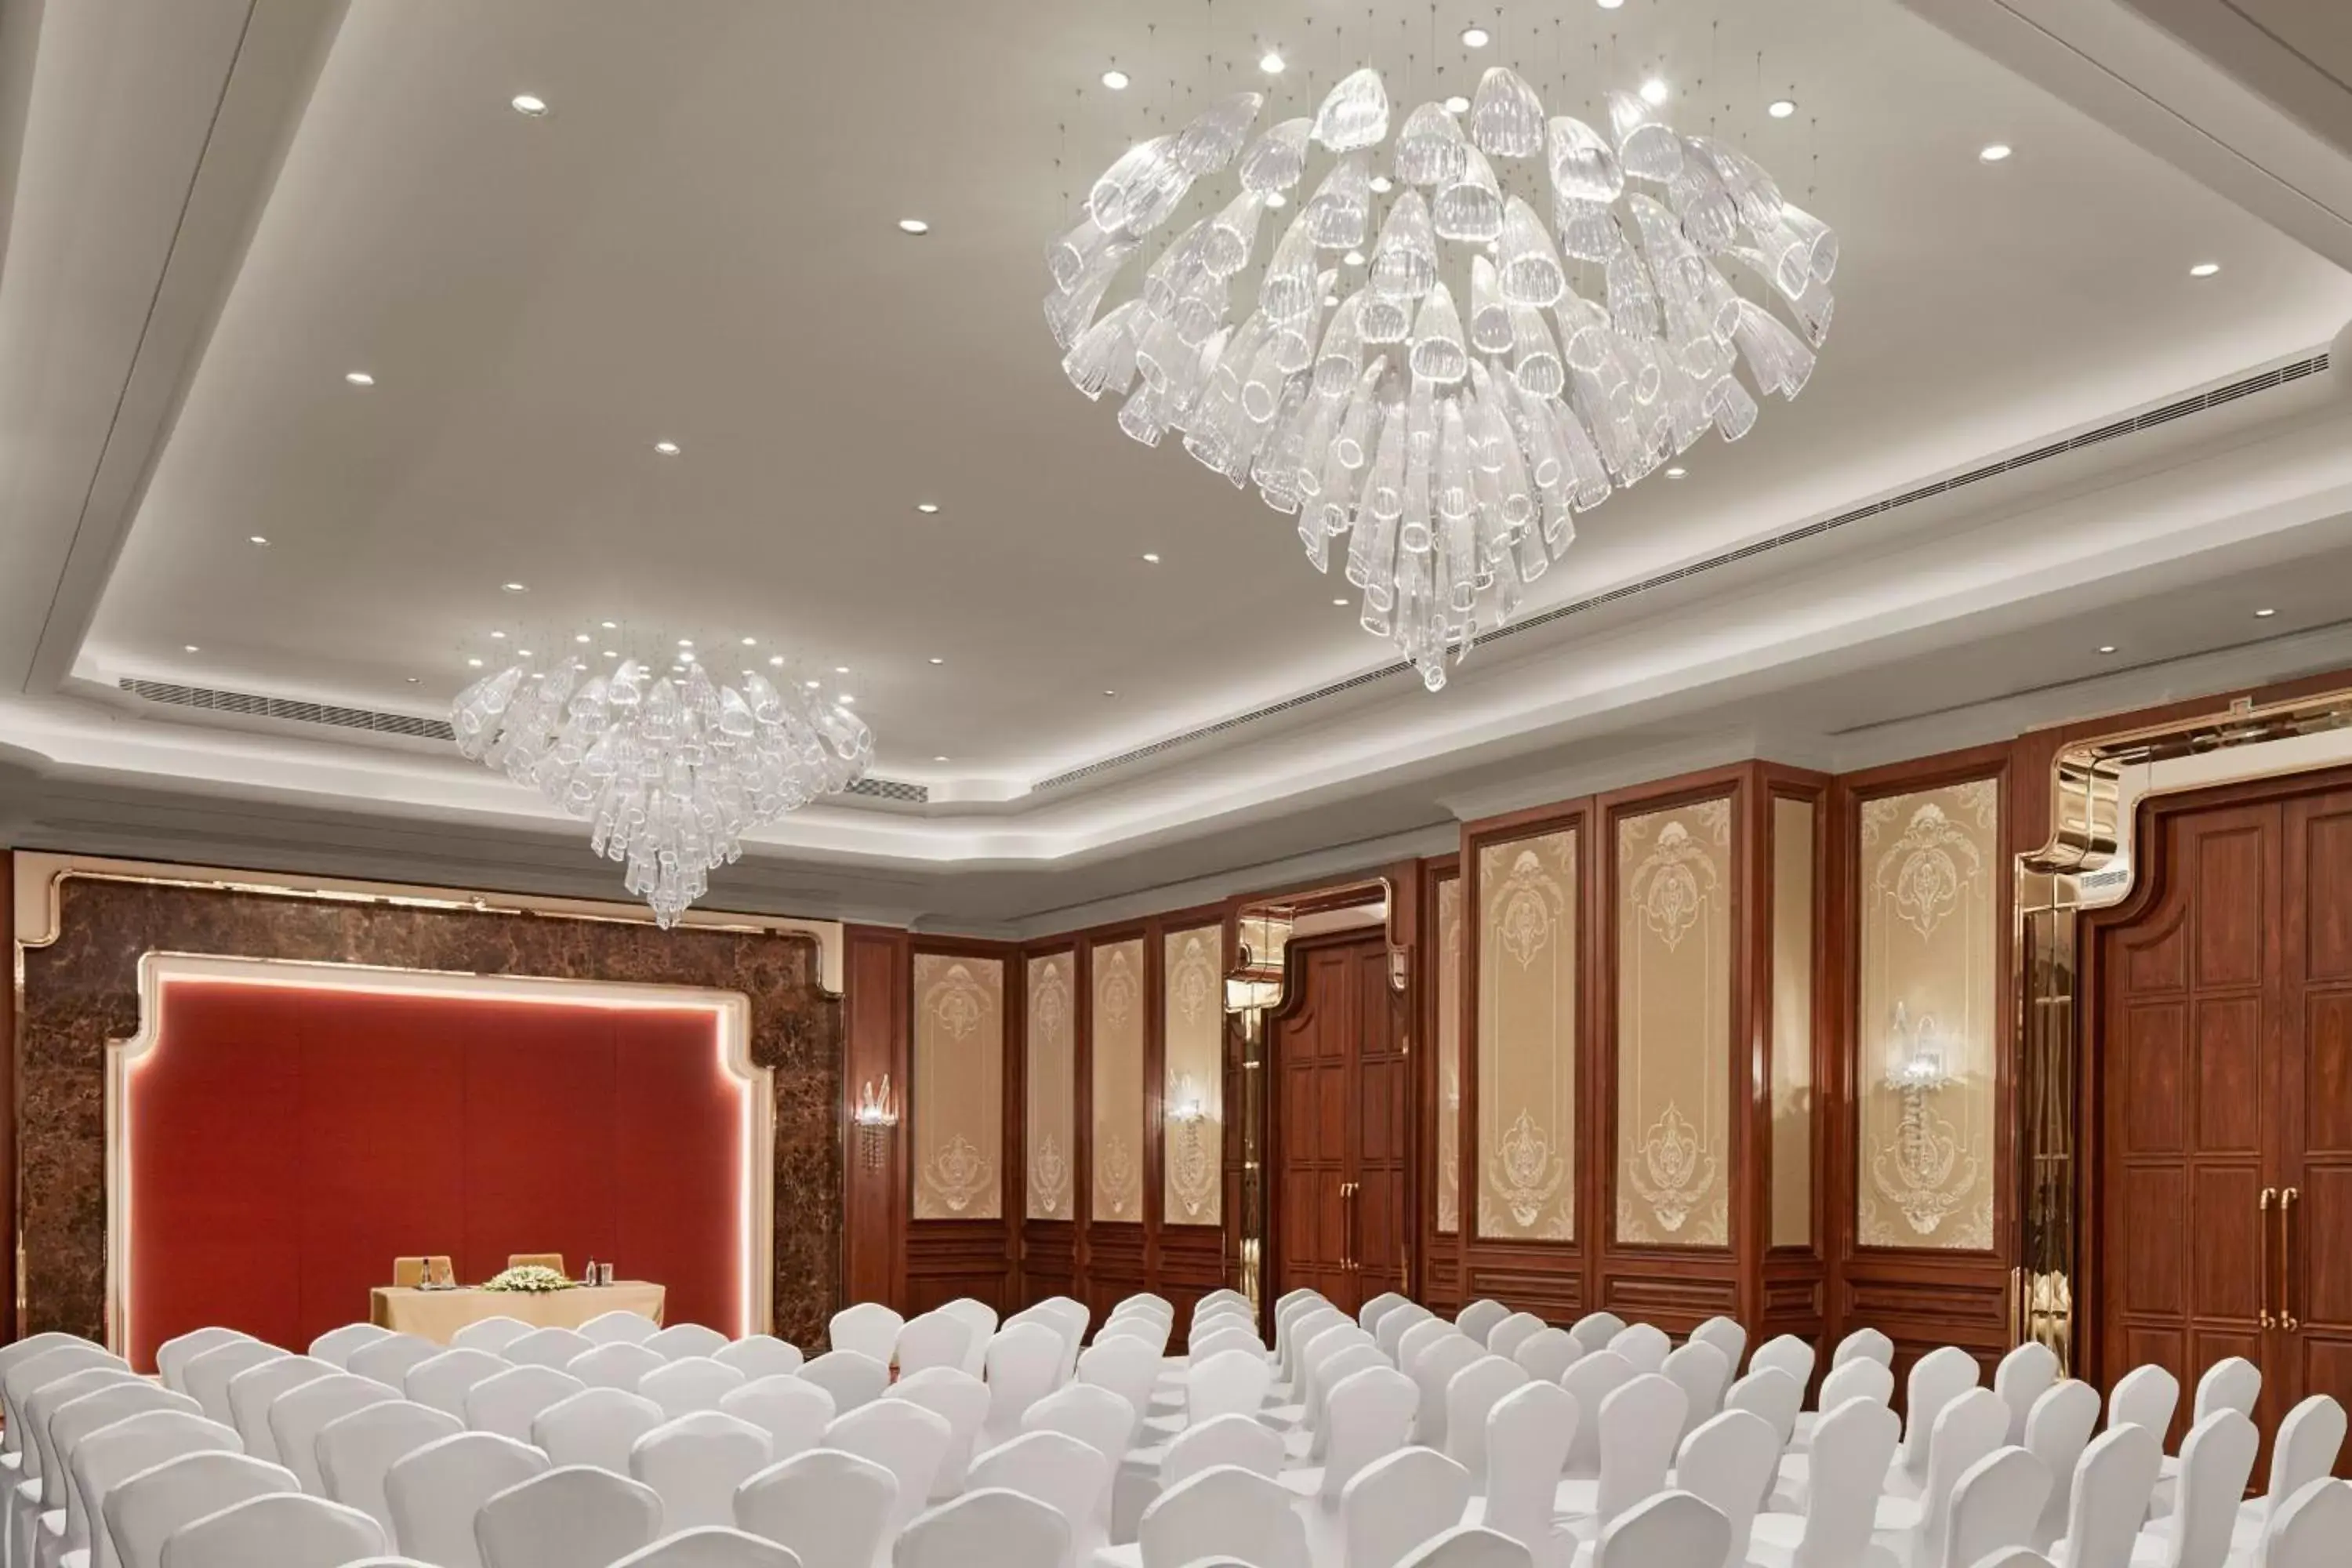 Meeting/conference room, Banquet Facilities in The Ritz-Carlton, Pune